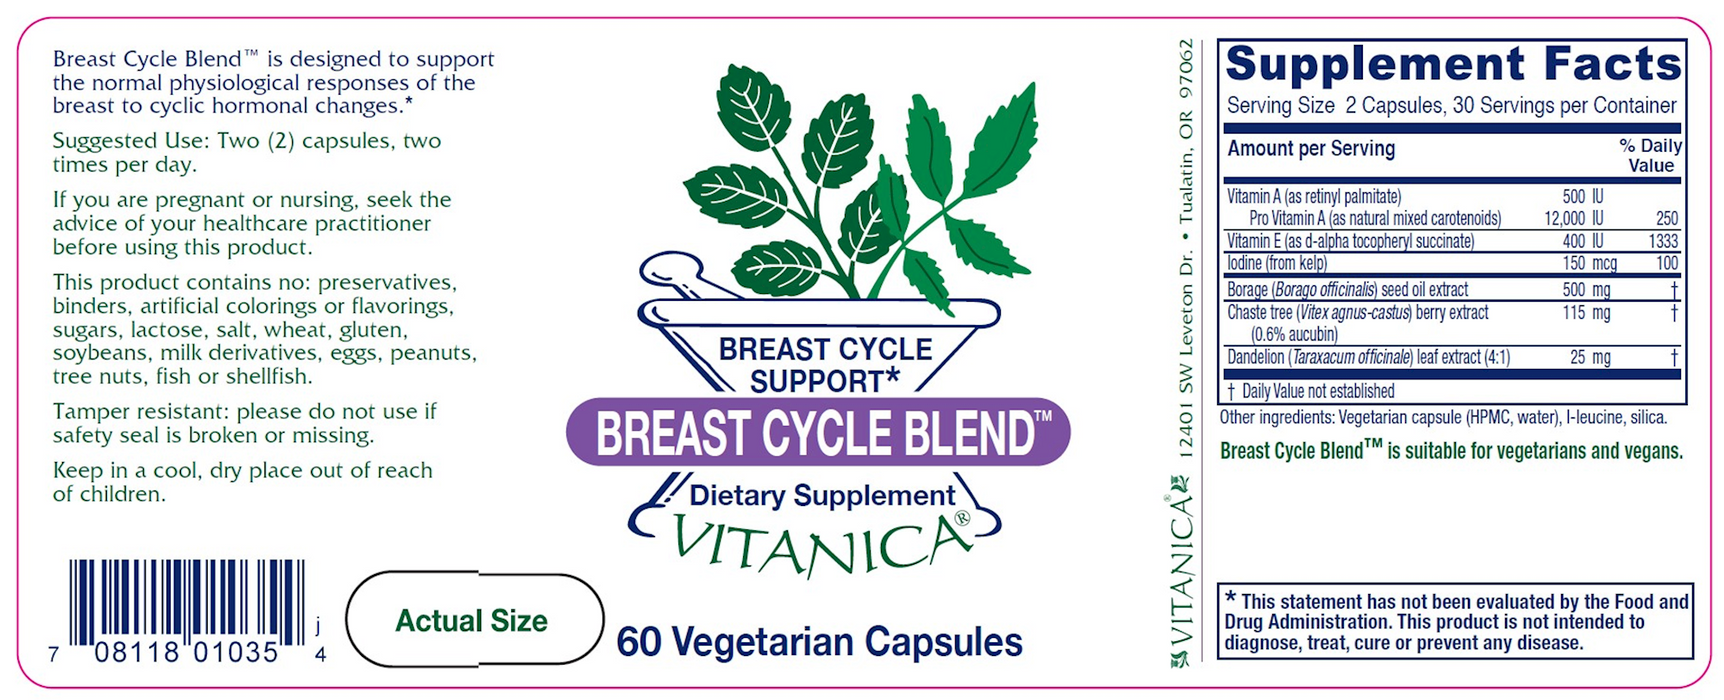 Breast Cycle Blend